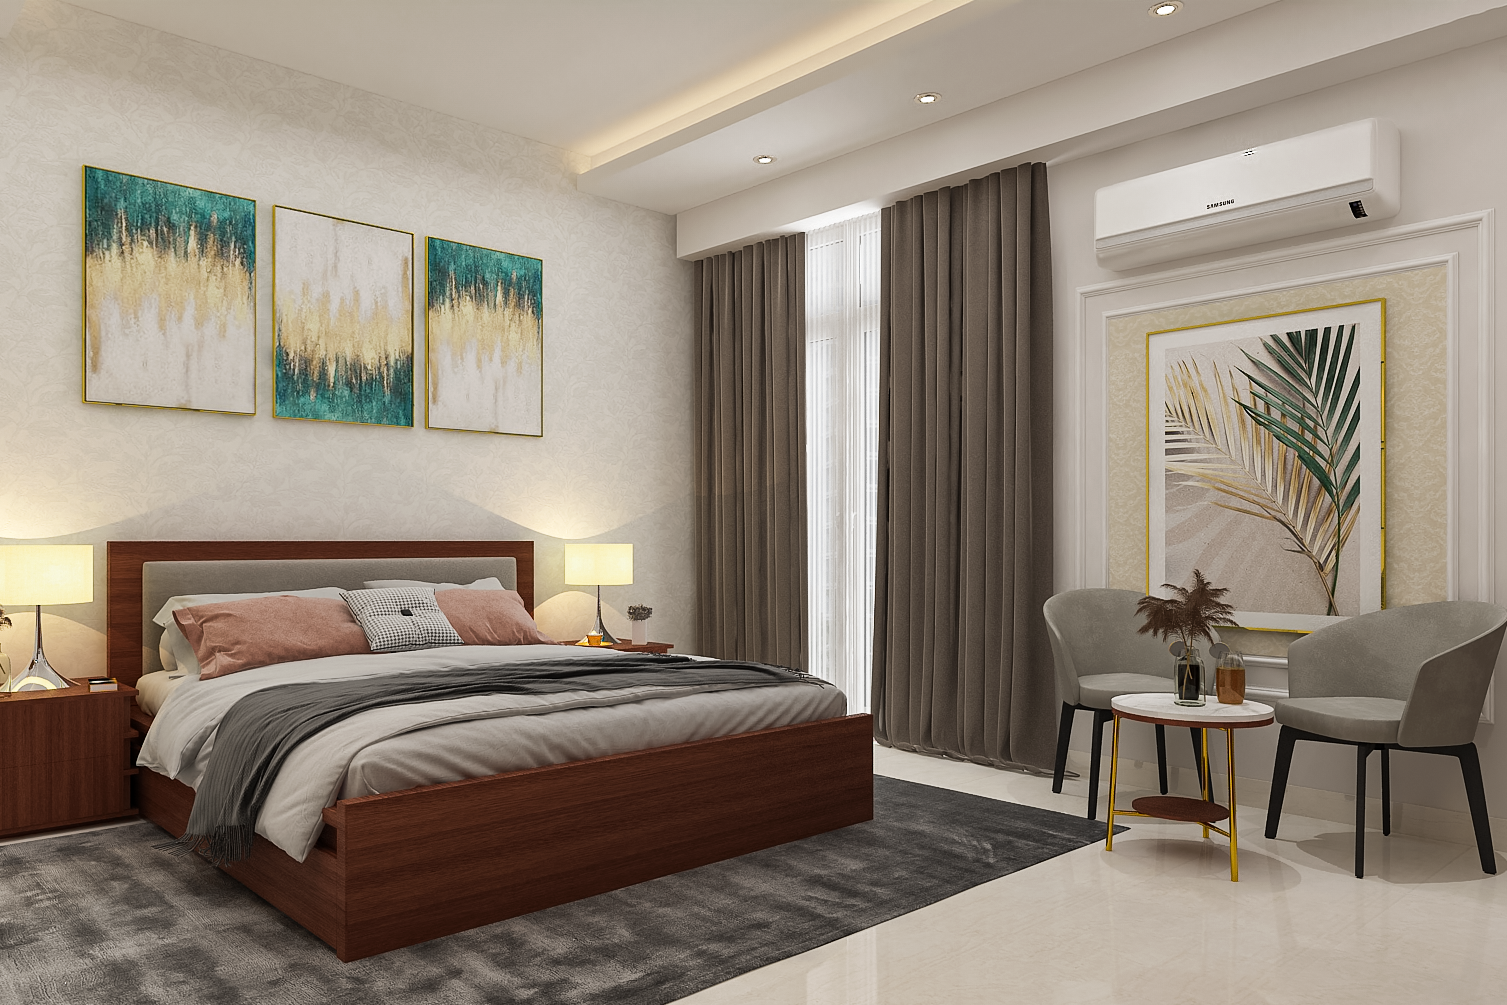 Spacious Modern Master Bedroom Design In Grey And Beige Colour ...